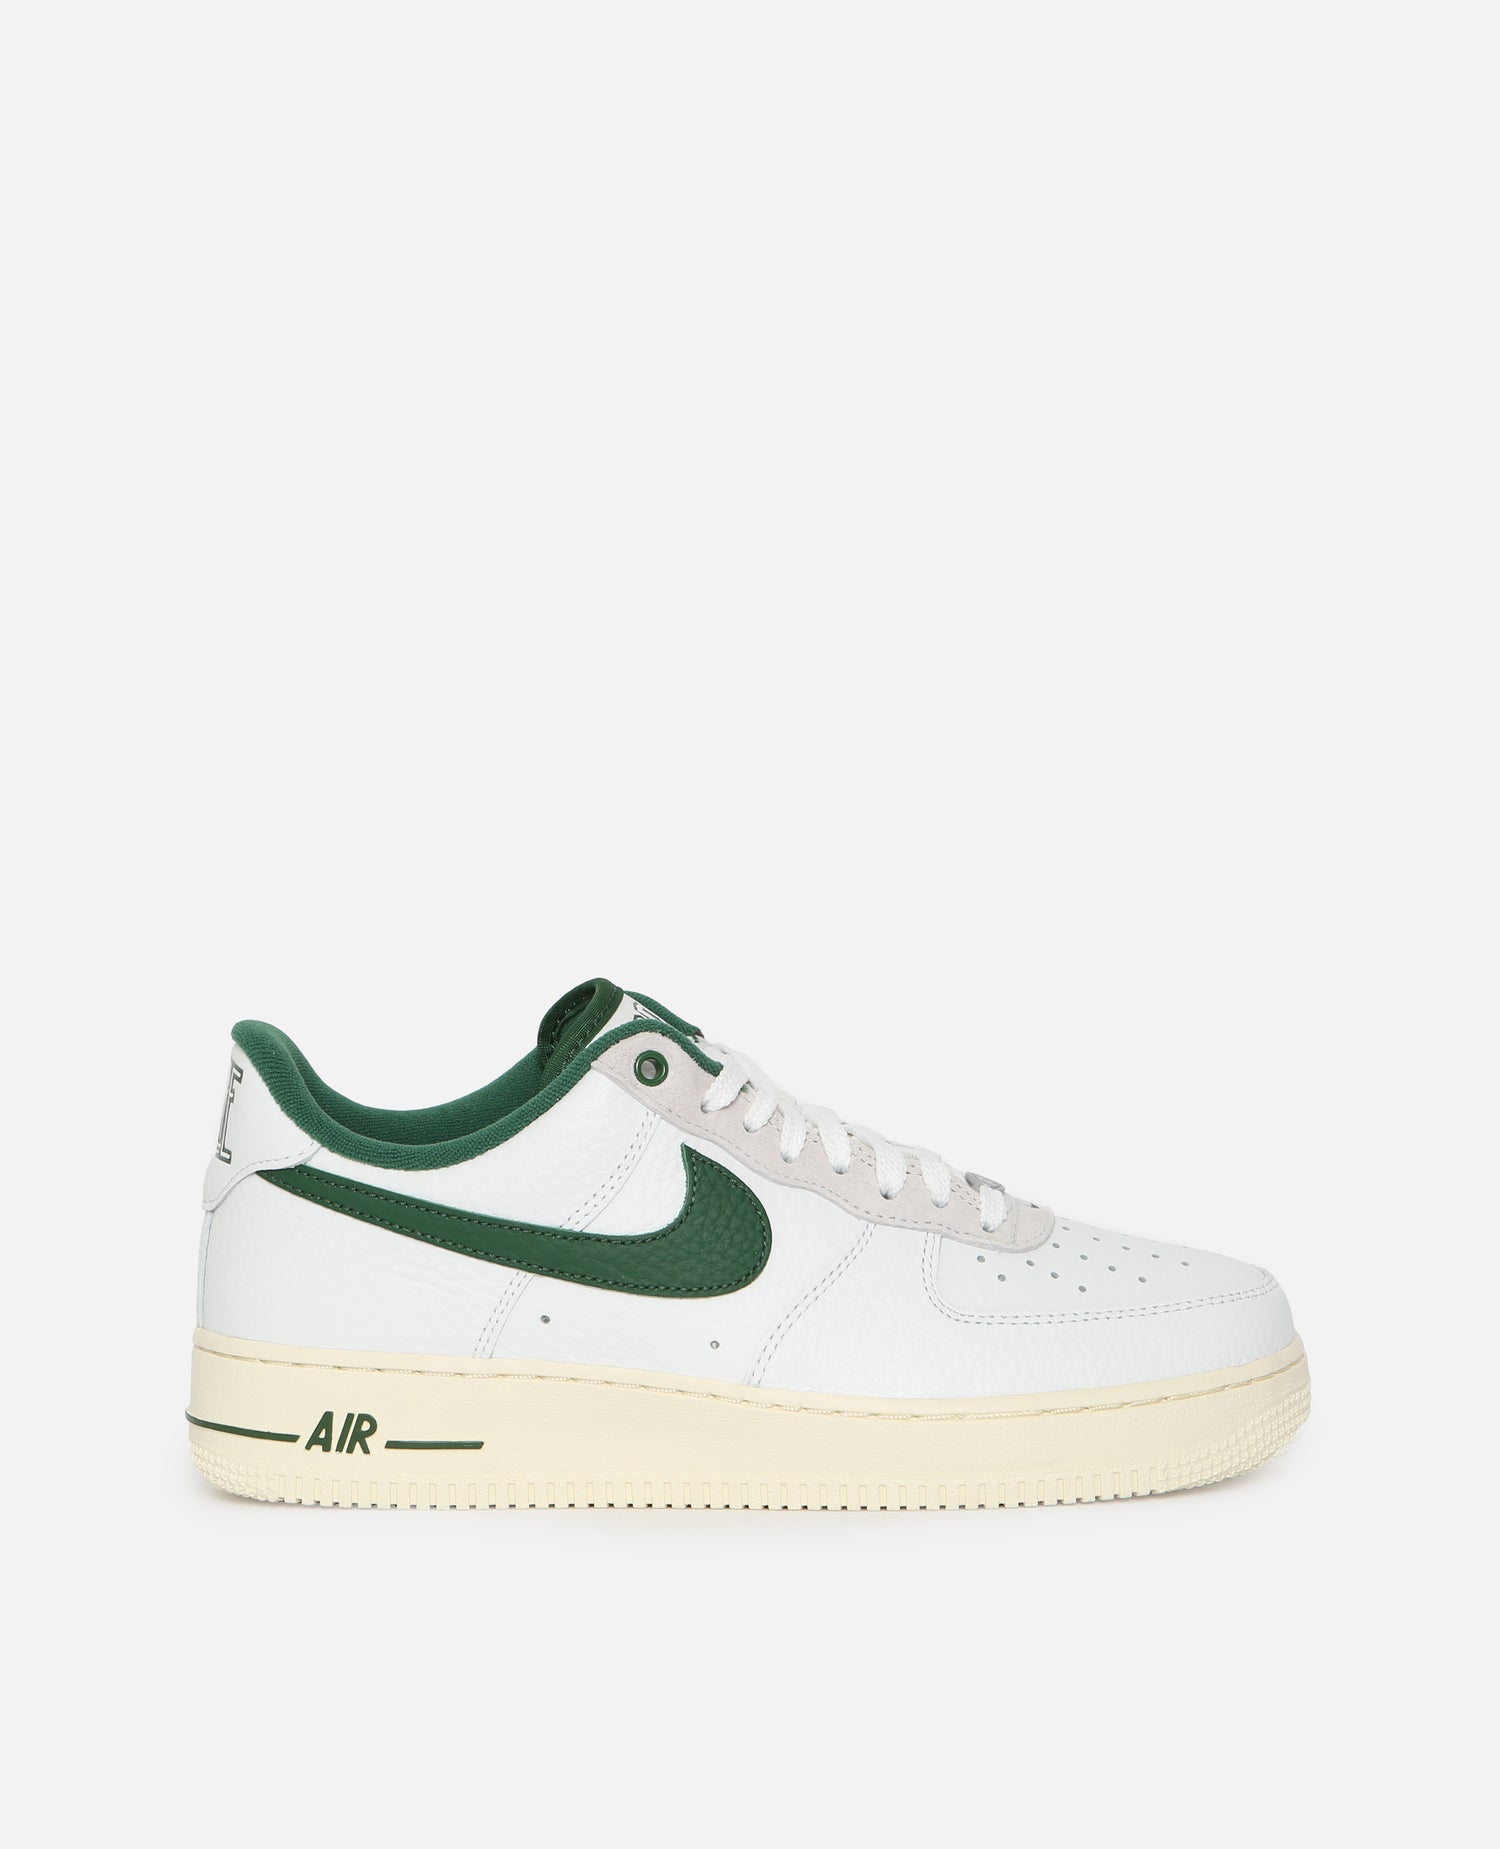 Nike WMNS Air Force 1 Low Command Force (Summit White/Gorge Green-White)